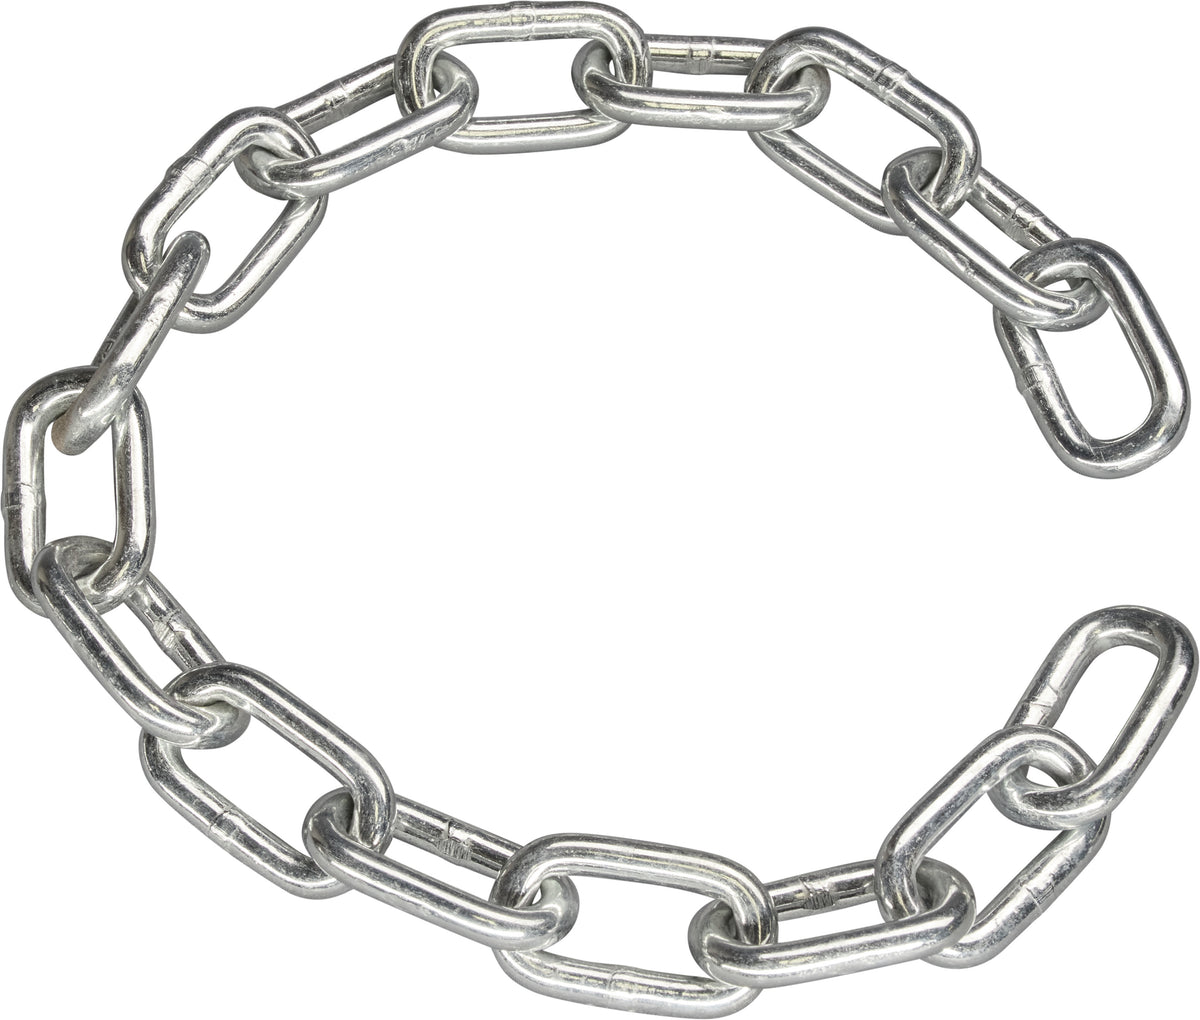 1000783 - Rear Tailgate Chain (11 Links)